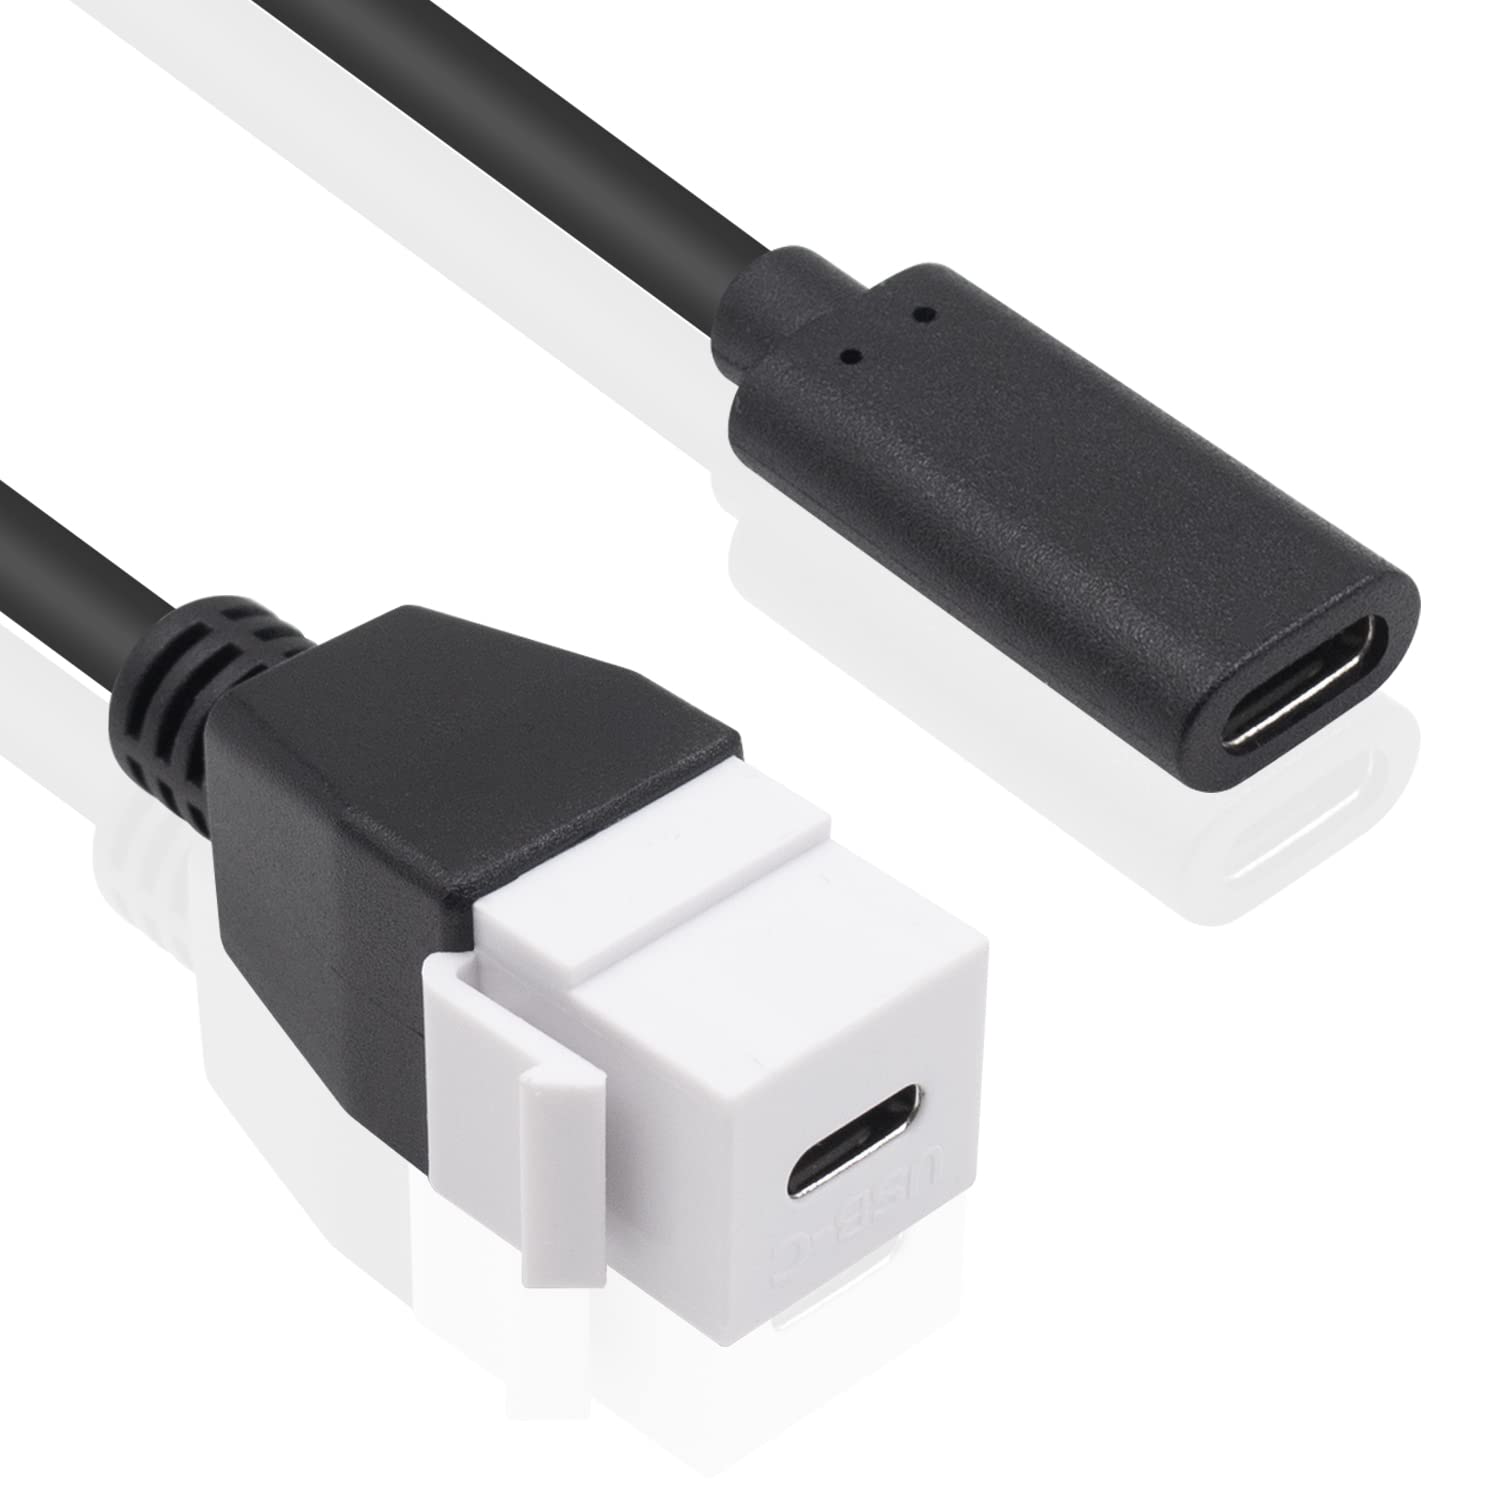 USB C Keystone Jack Insert Cable for Wall Plate Outlet Panel [10006] -  $8.99 